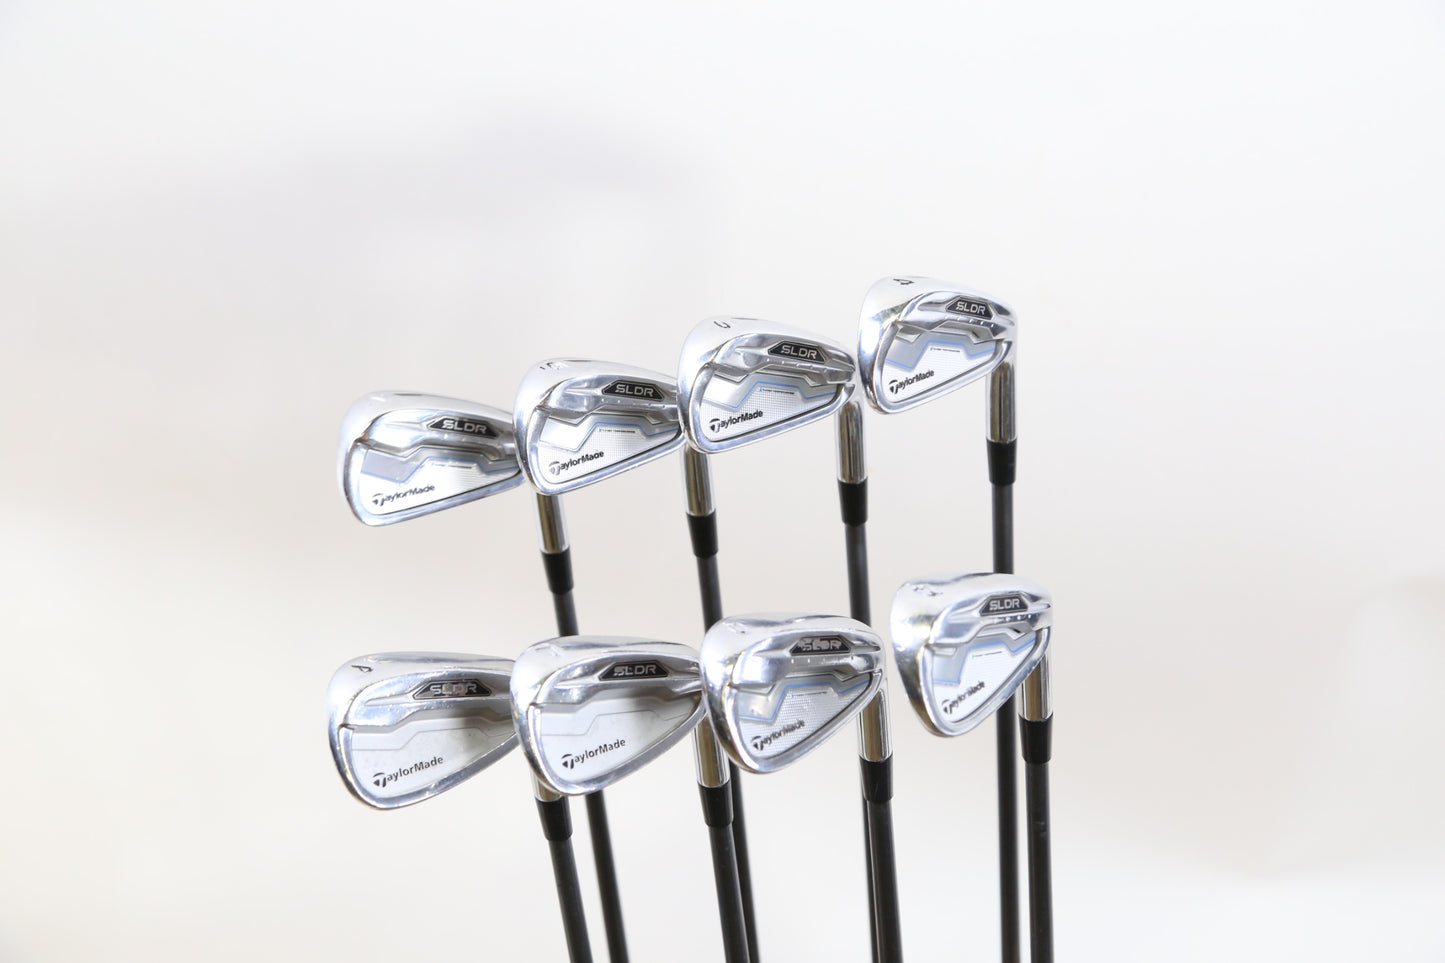 Used TaylorMade SLDR Iron Set - Right-Handed - 4-AW - Seniors Flex